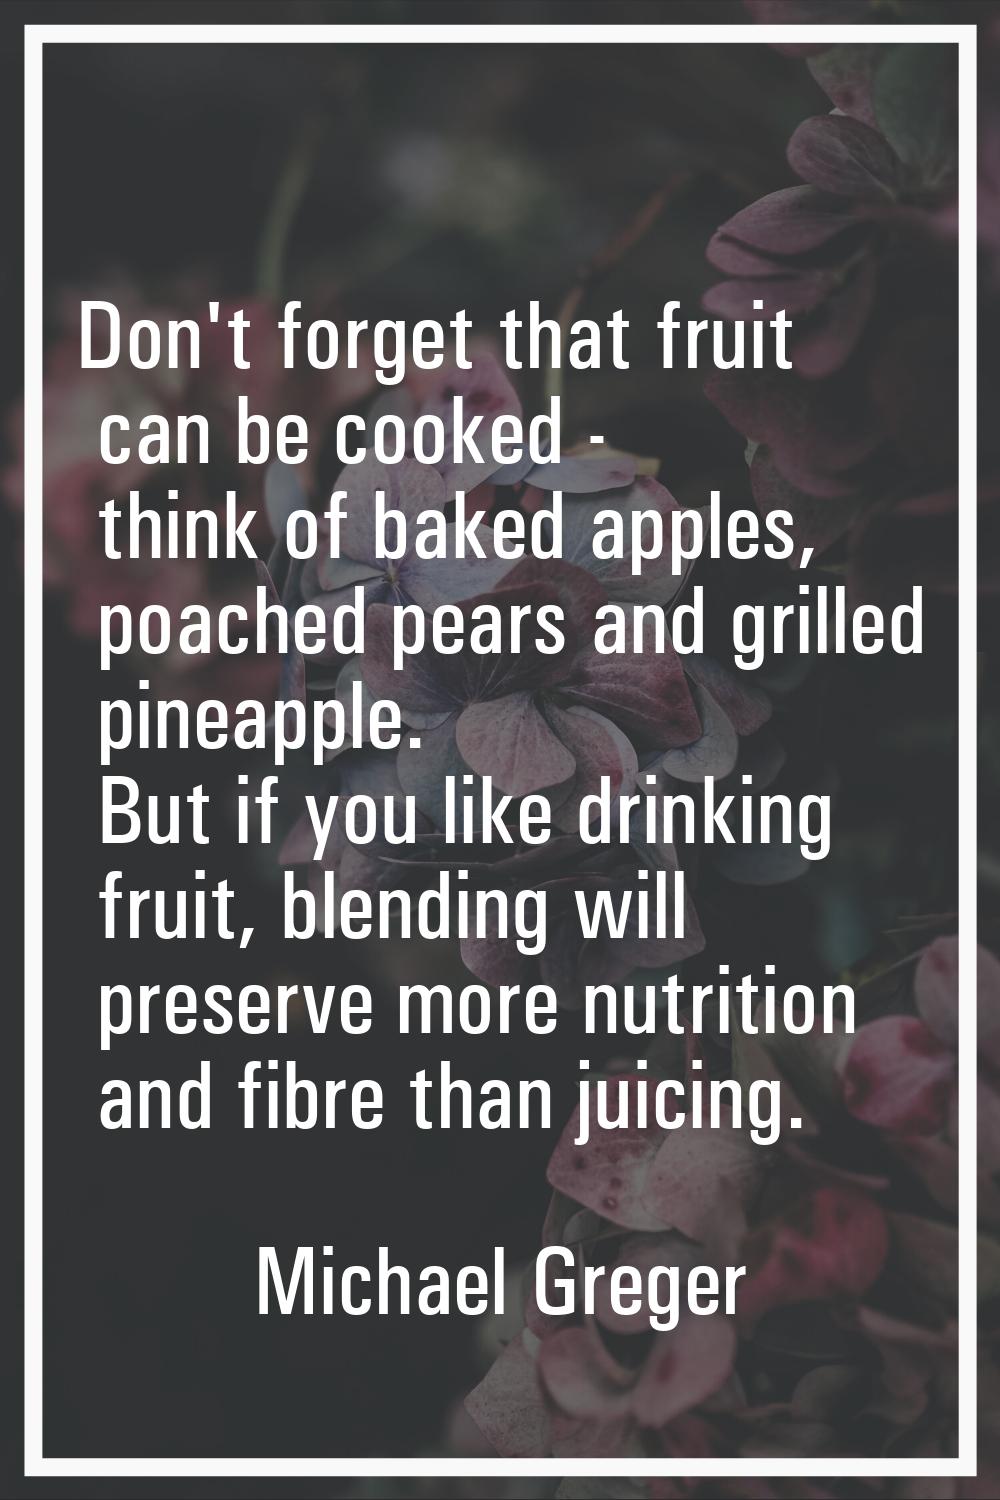 Don't forget that fruit can be cooked - think of baked apples, poached pears and grilled pineapple.